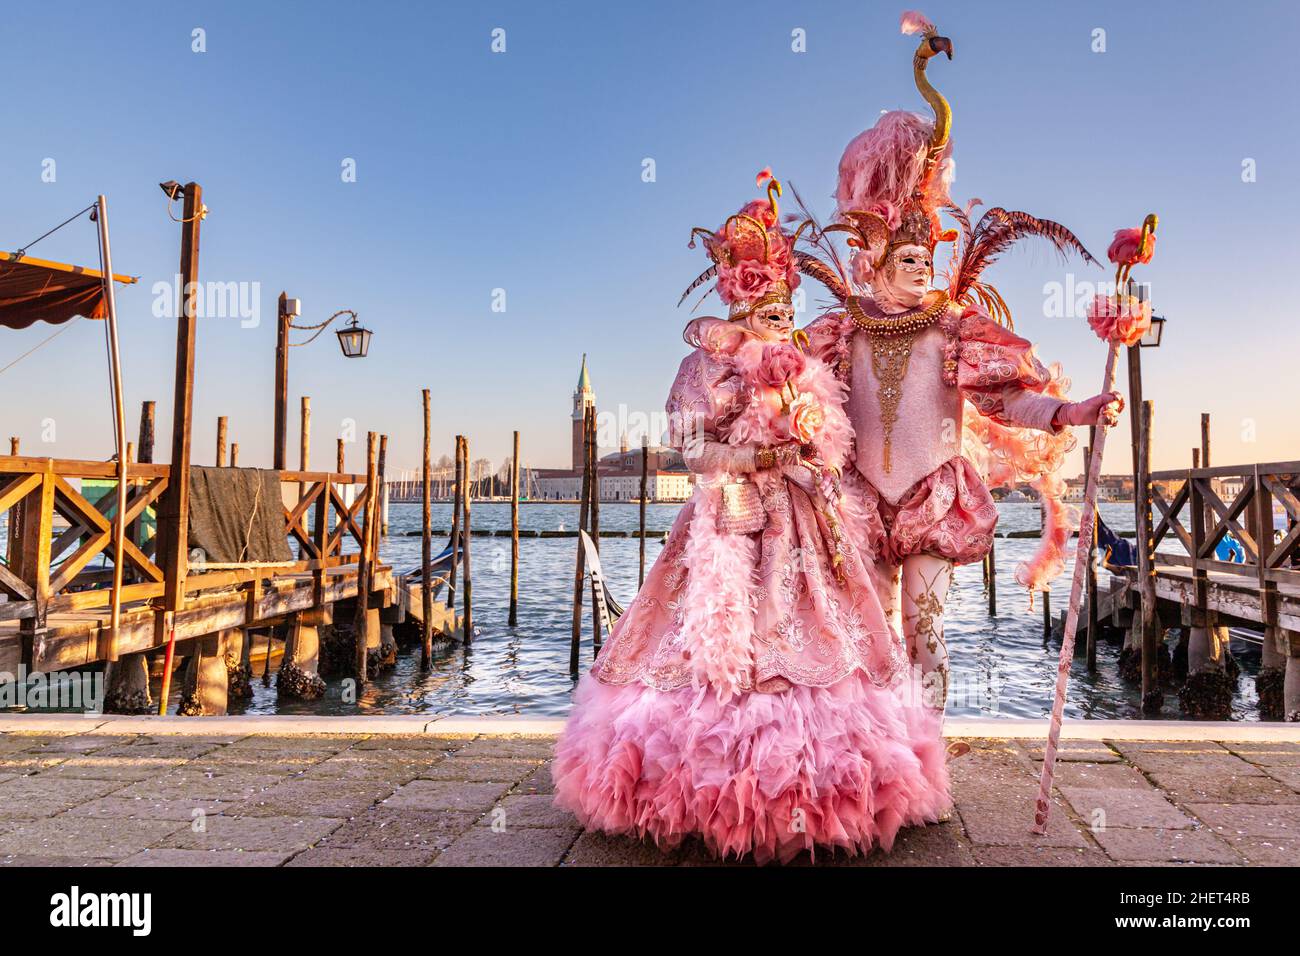 Man and woman in pink flamingo historic  fancy dress rococo costumes, pose by the lagoon at Venice Carnival, Carnevale di Venezia, Italy Stock Photo